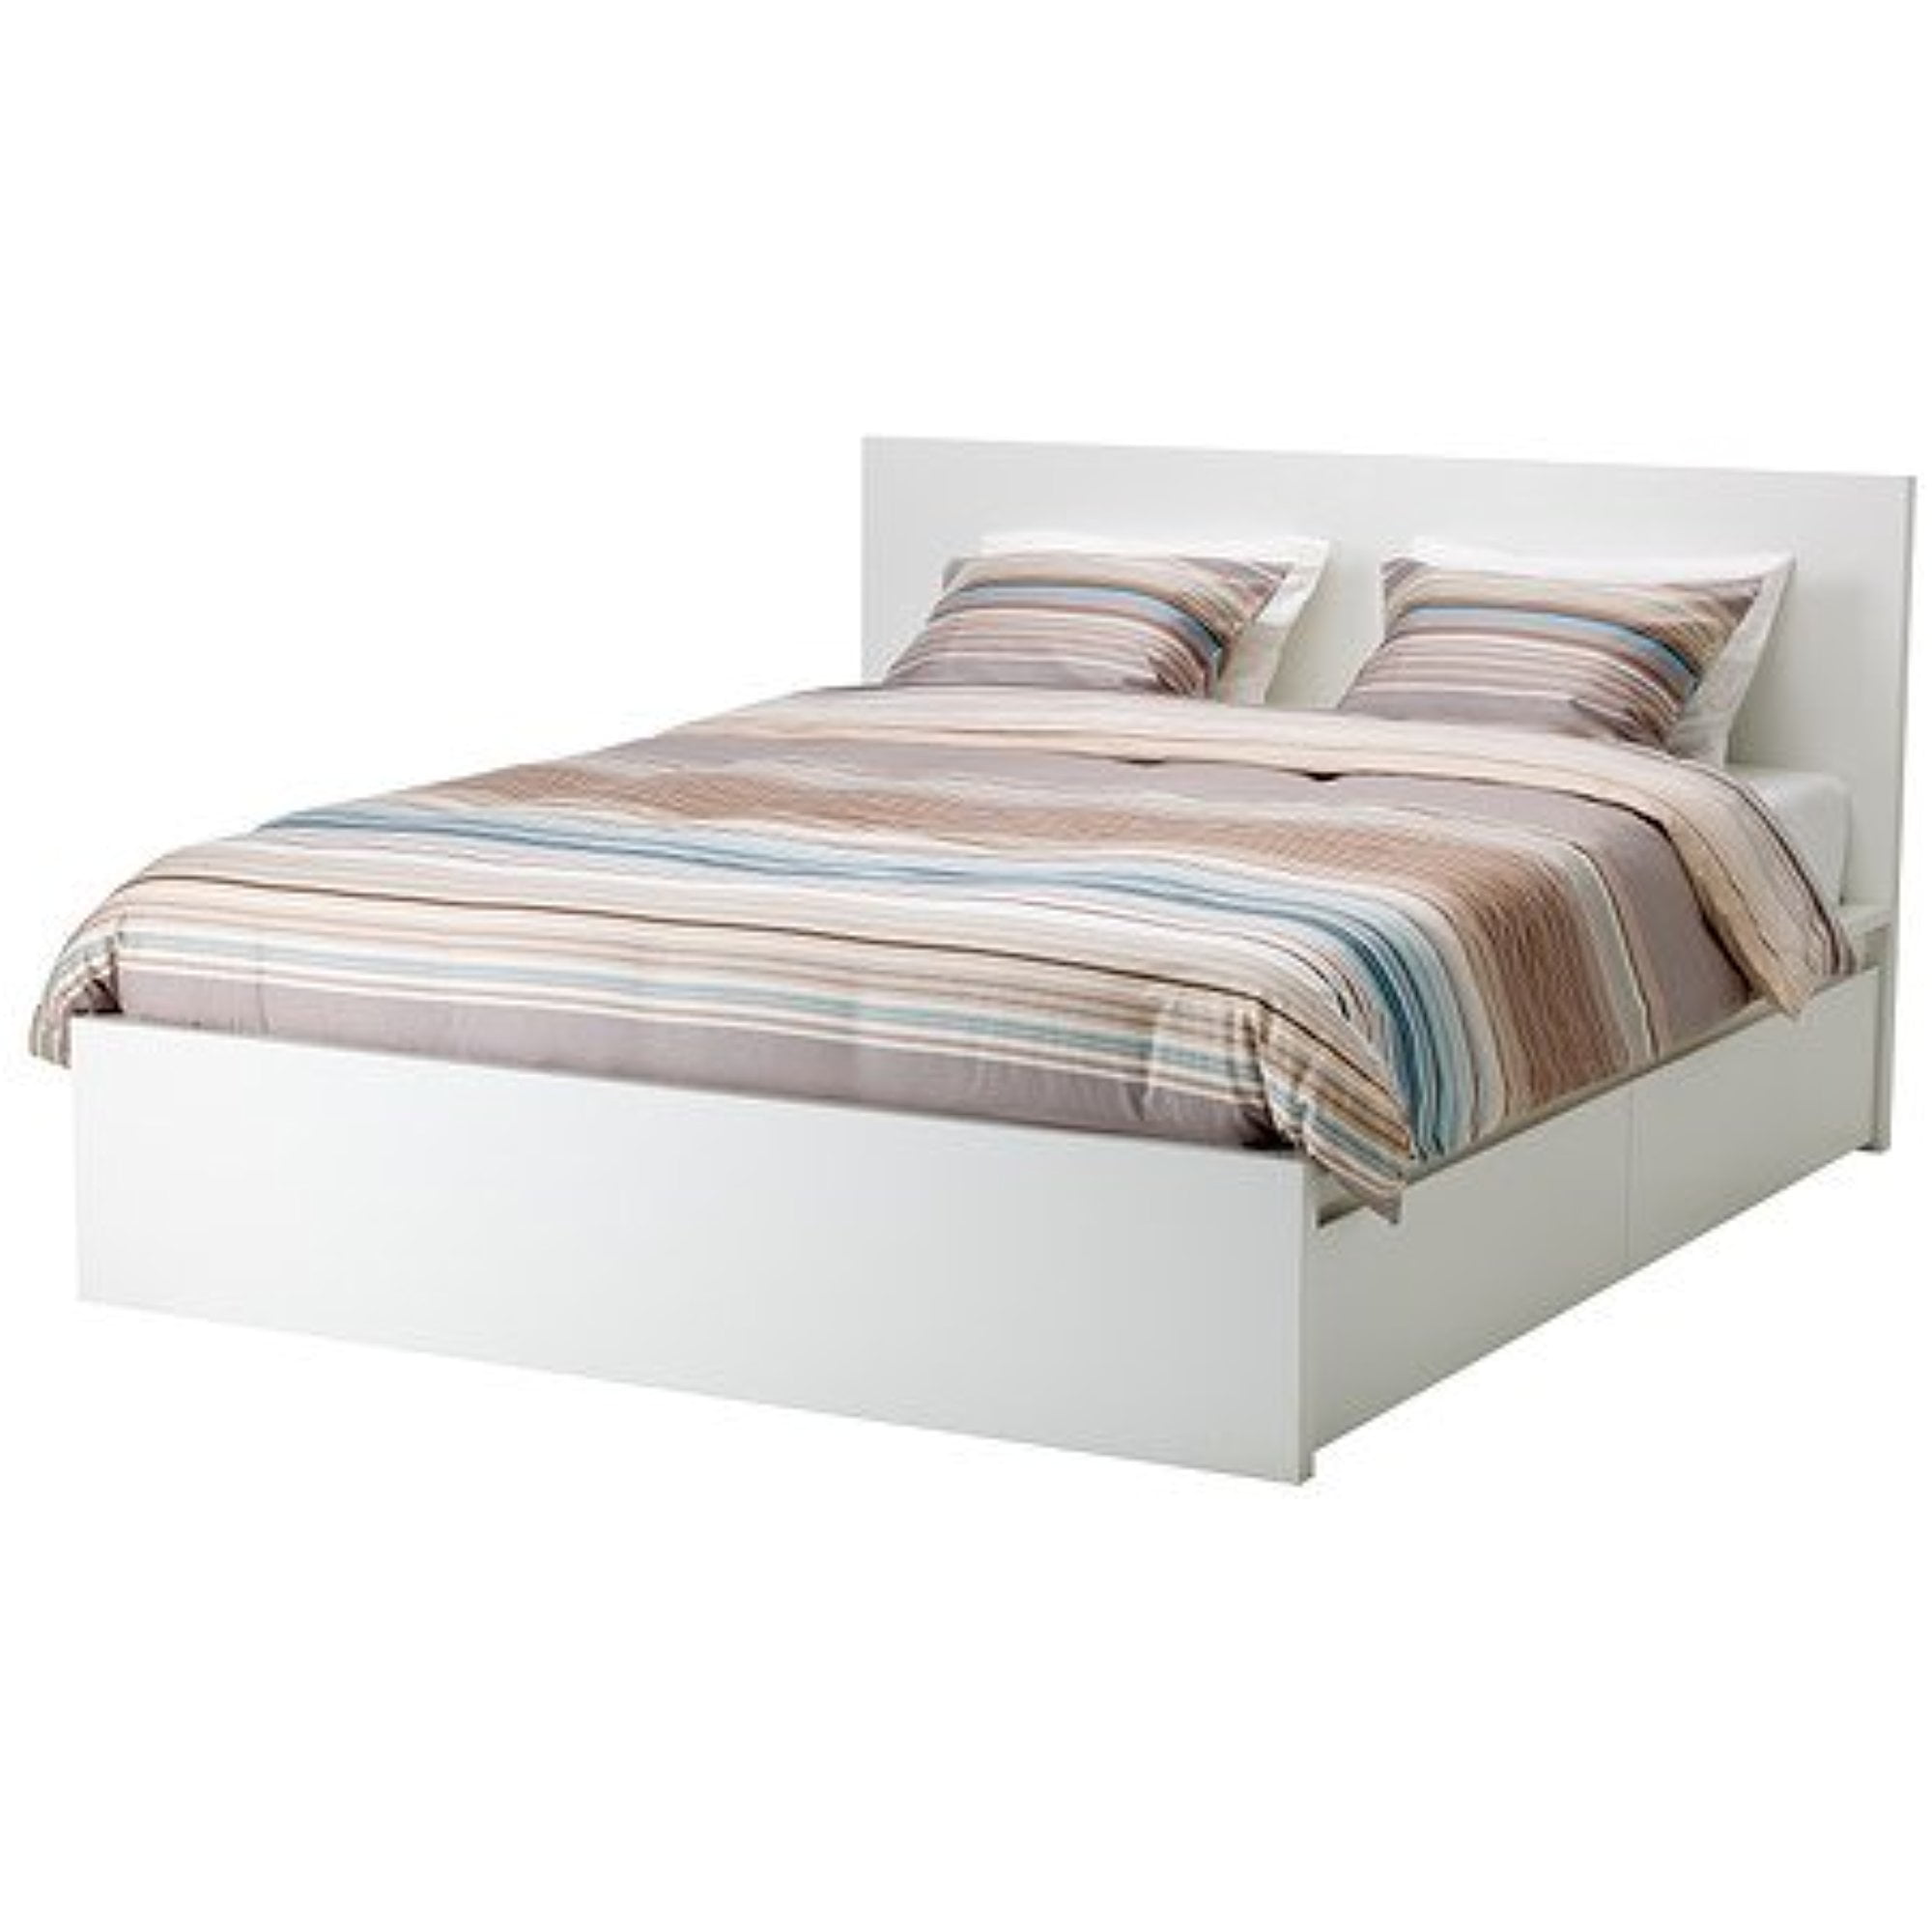 High Bed Frame 4 Storage Boxes, Ikea King Size Bed Frame With Storage Headboard